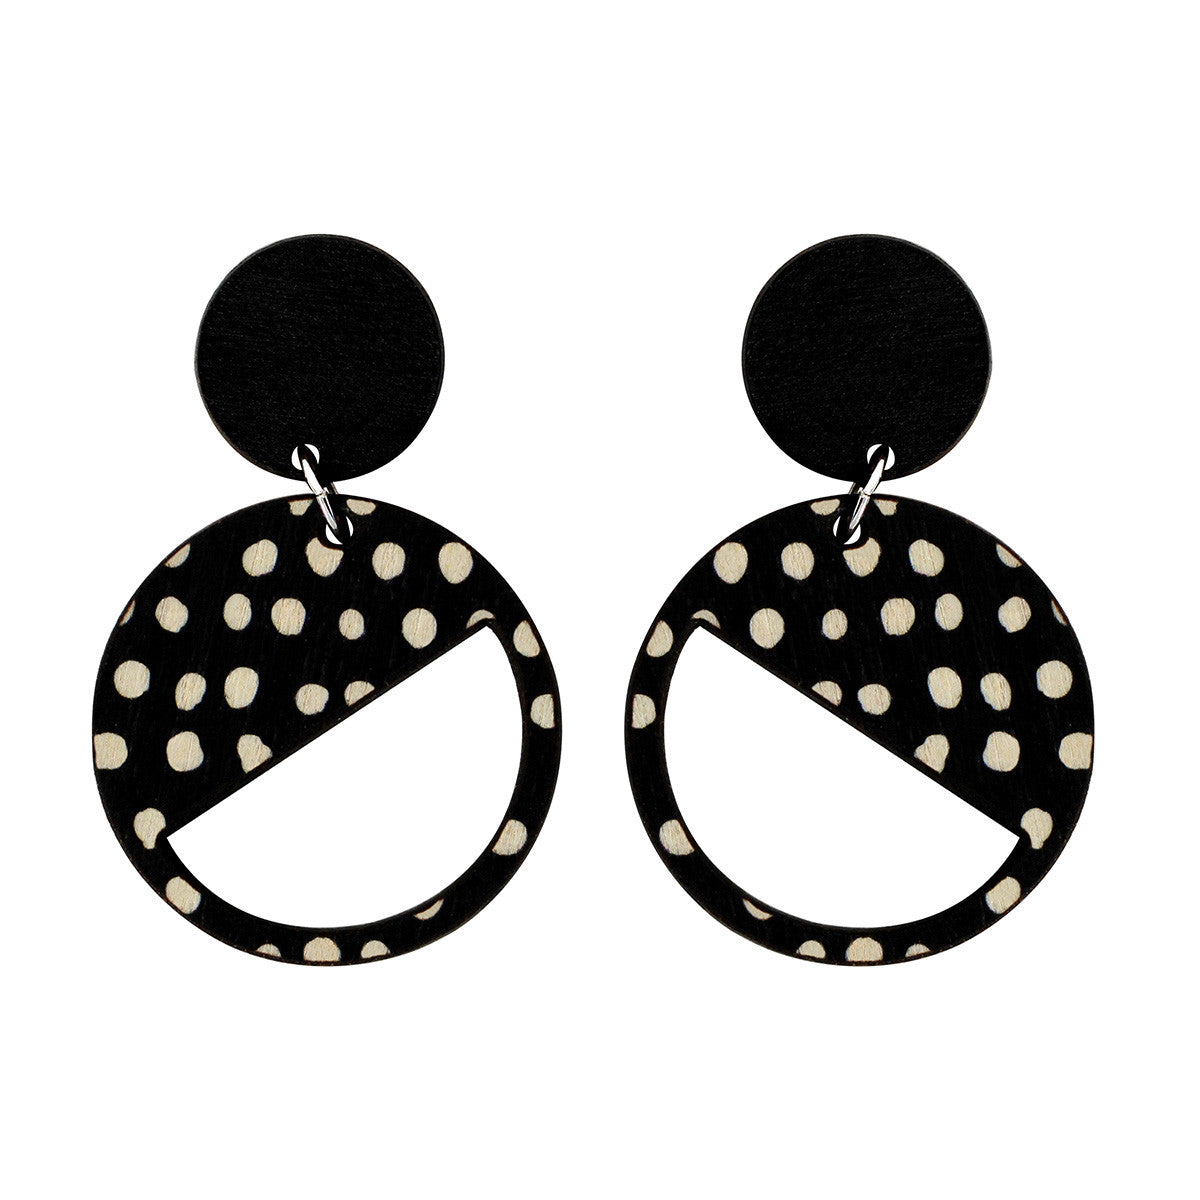 2 tiered earrings with black and spots